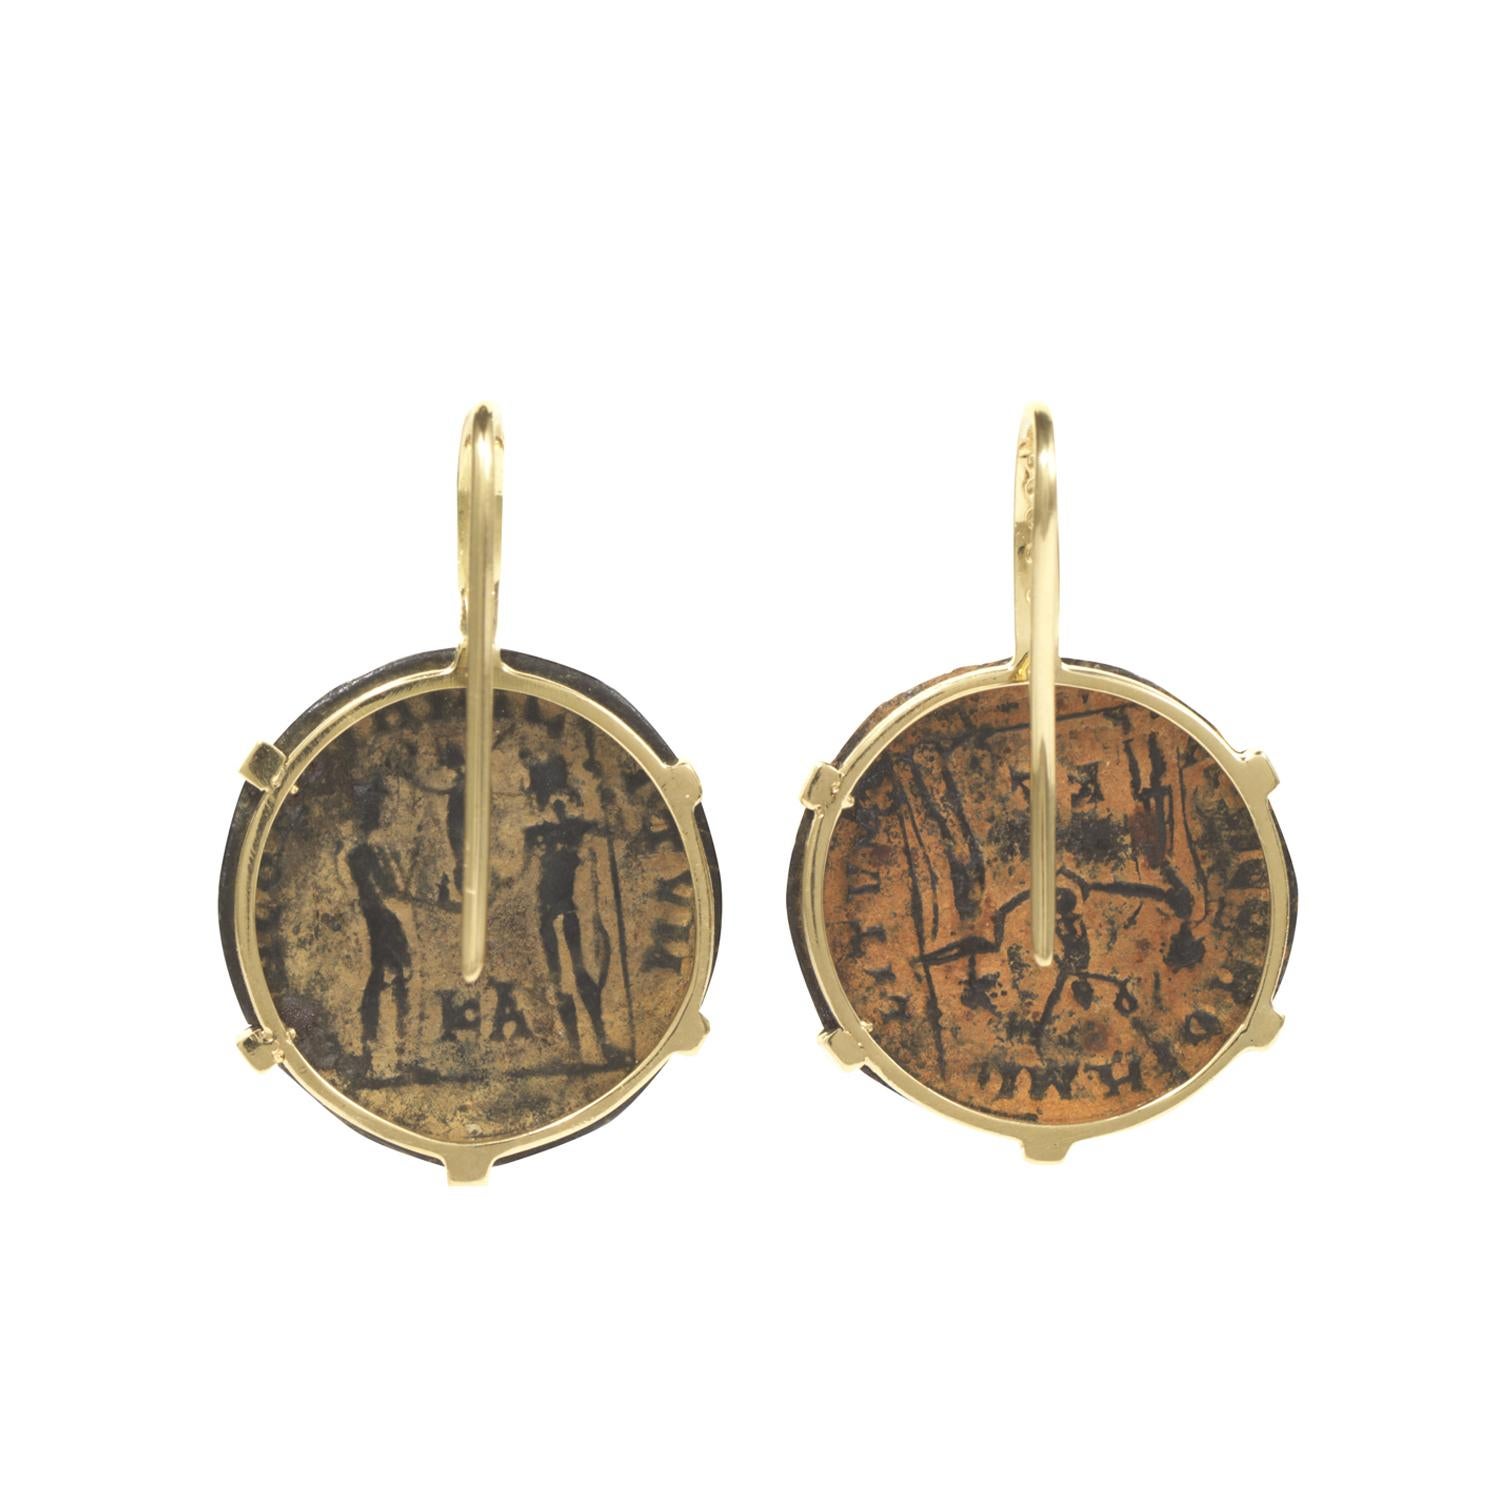 These Dubini coin earrings from the 'Empires' collection feature authentic Roman Imperial coins of Maximian minted circa 286-295 A.D. set in 18K yellow gold with diamonds.

* Due to the unique process of hand carving coins in ancient times, there